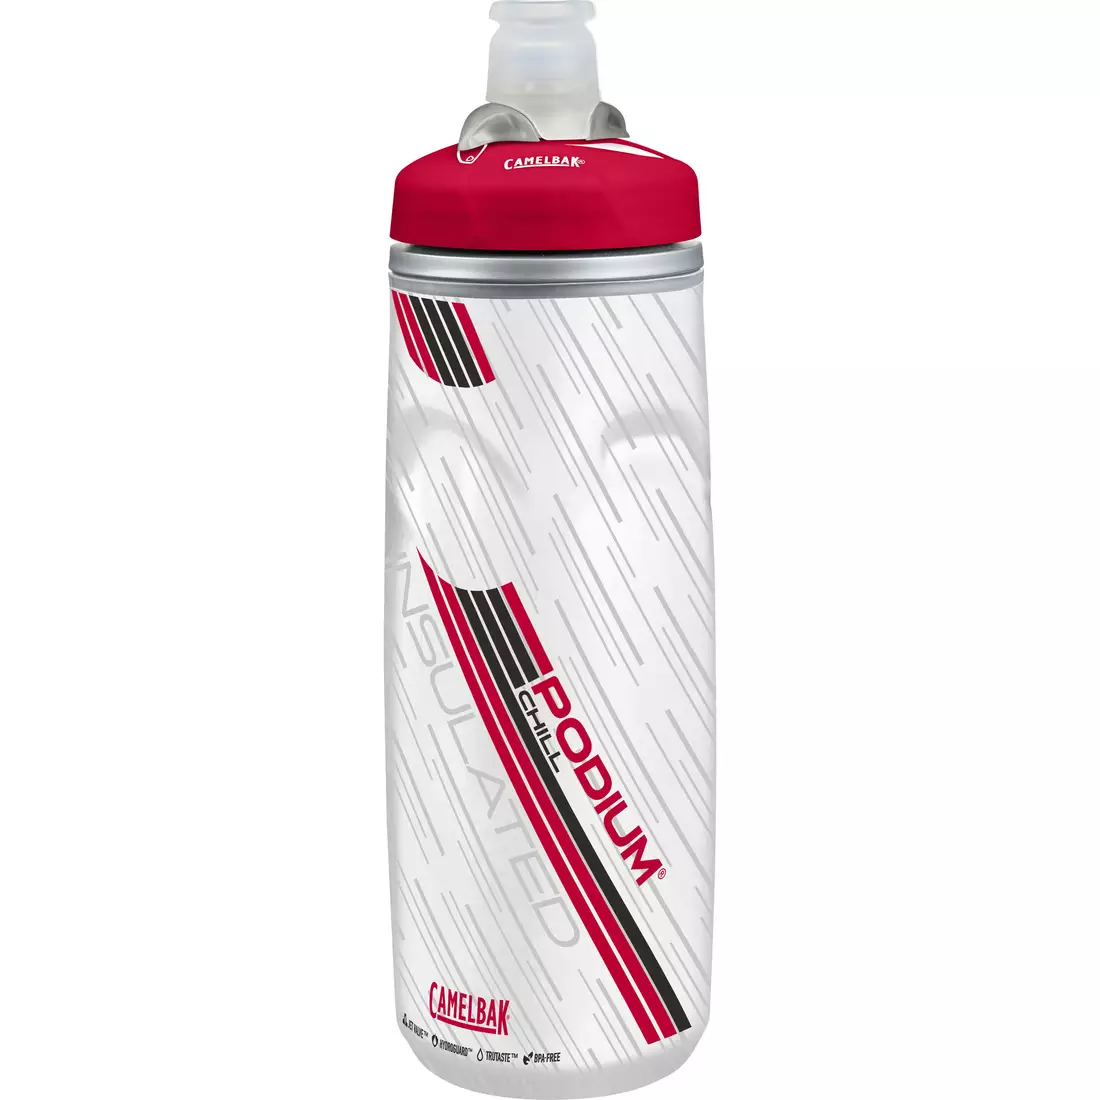 Camelbak SS18 Podium Chill Thermal Cycling Bottle 21oz / 620ml Red